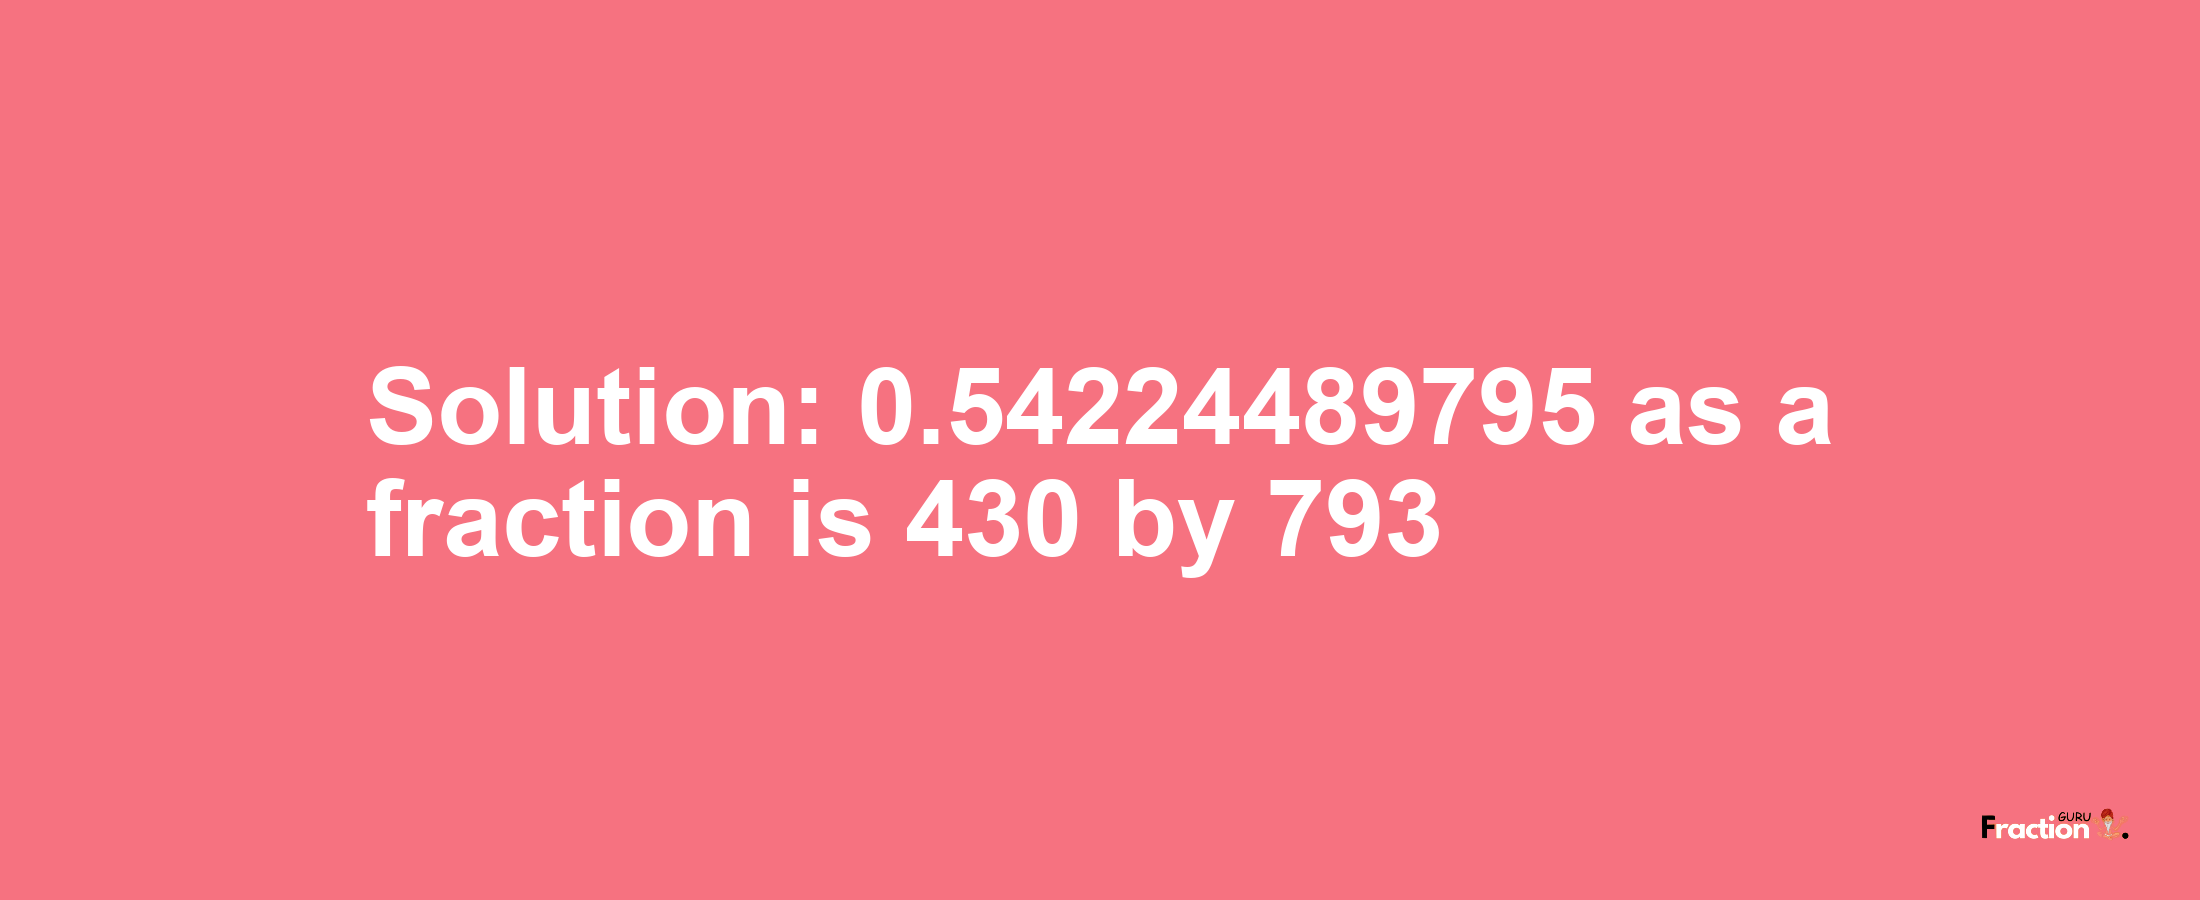 Solution:0.54224489795 as a fraction is 430/793